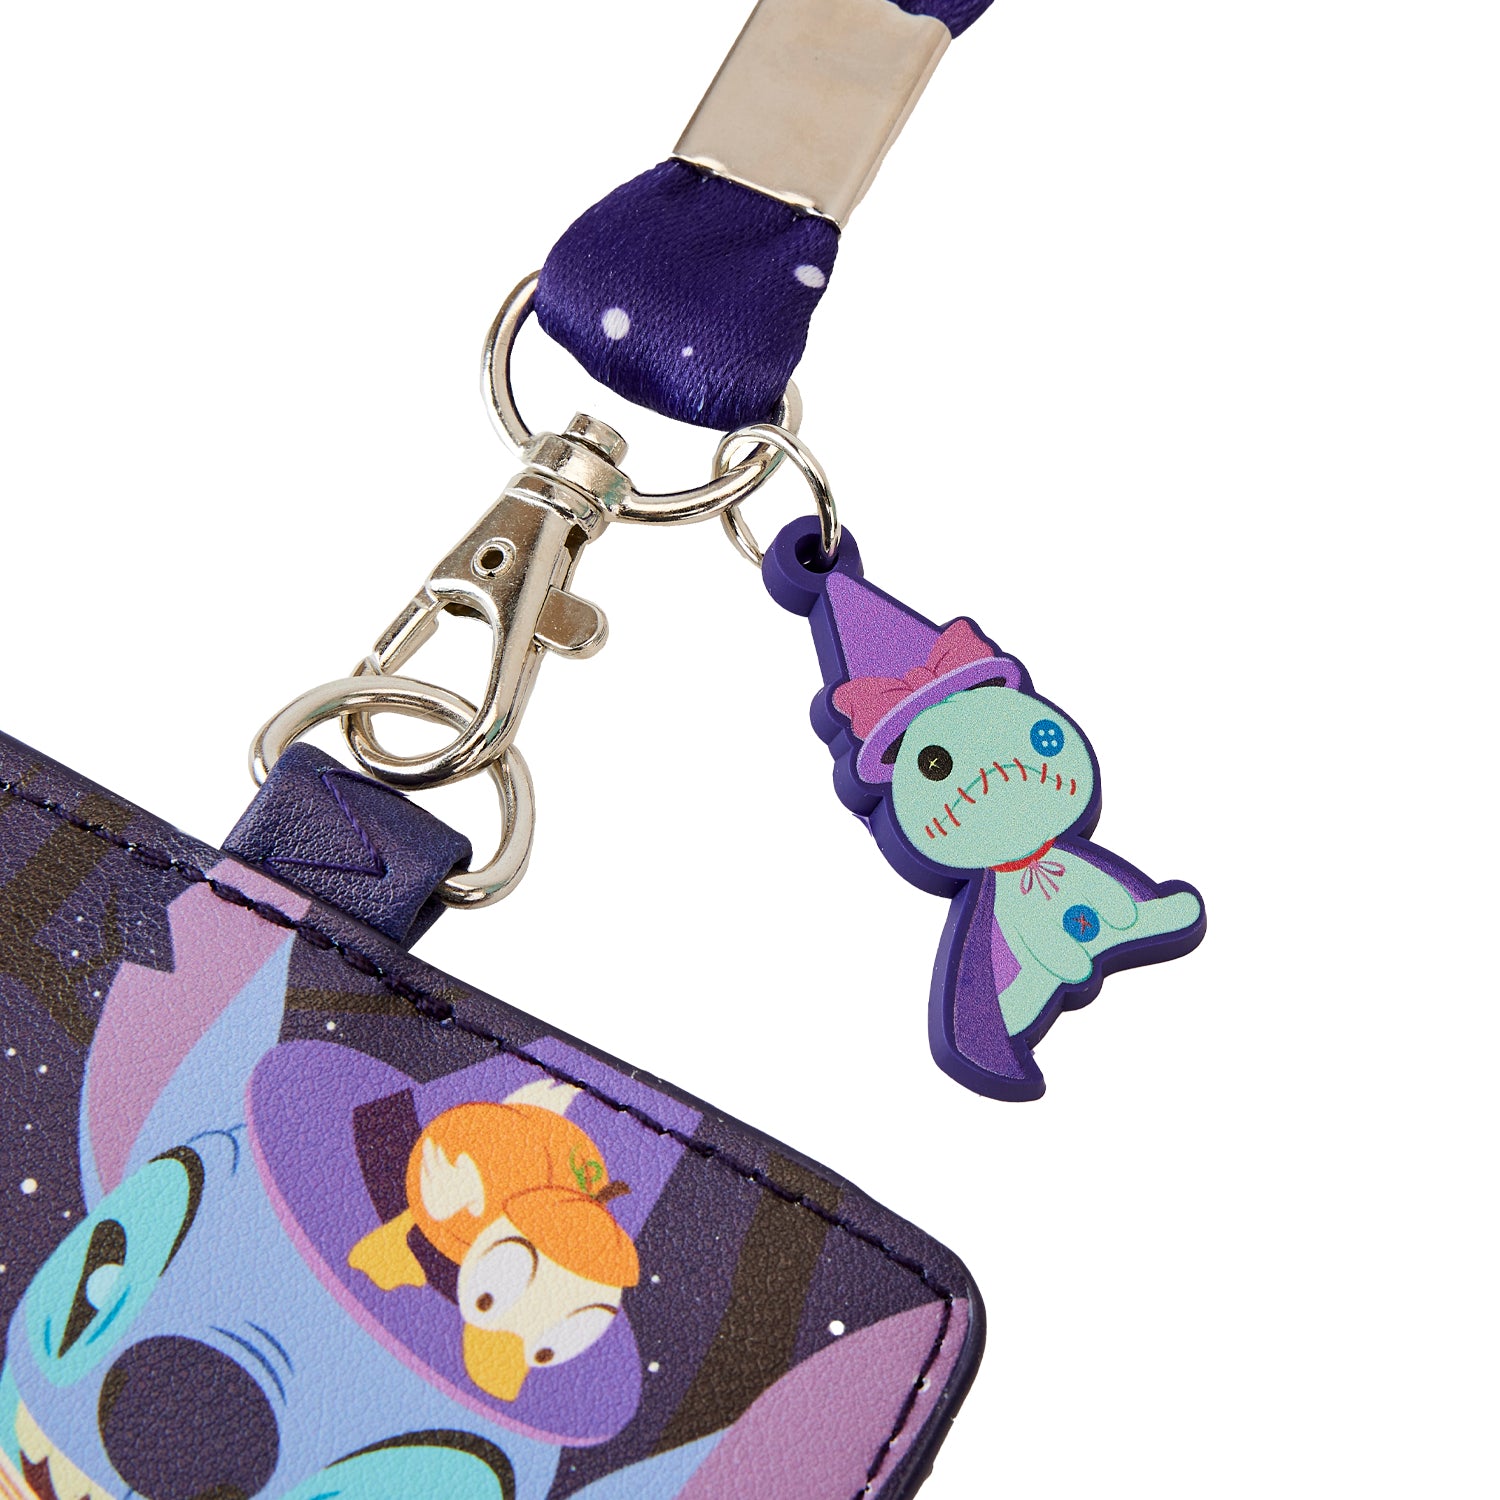 Disney | Lilo and Stitch Halloween Lanyard with Cardholder